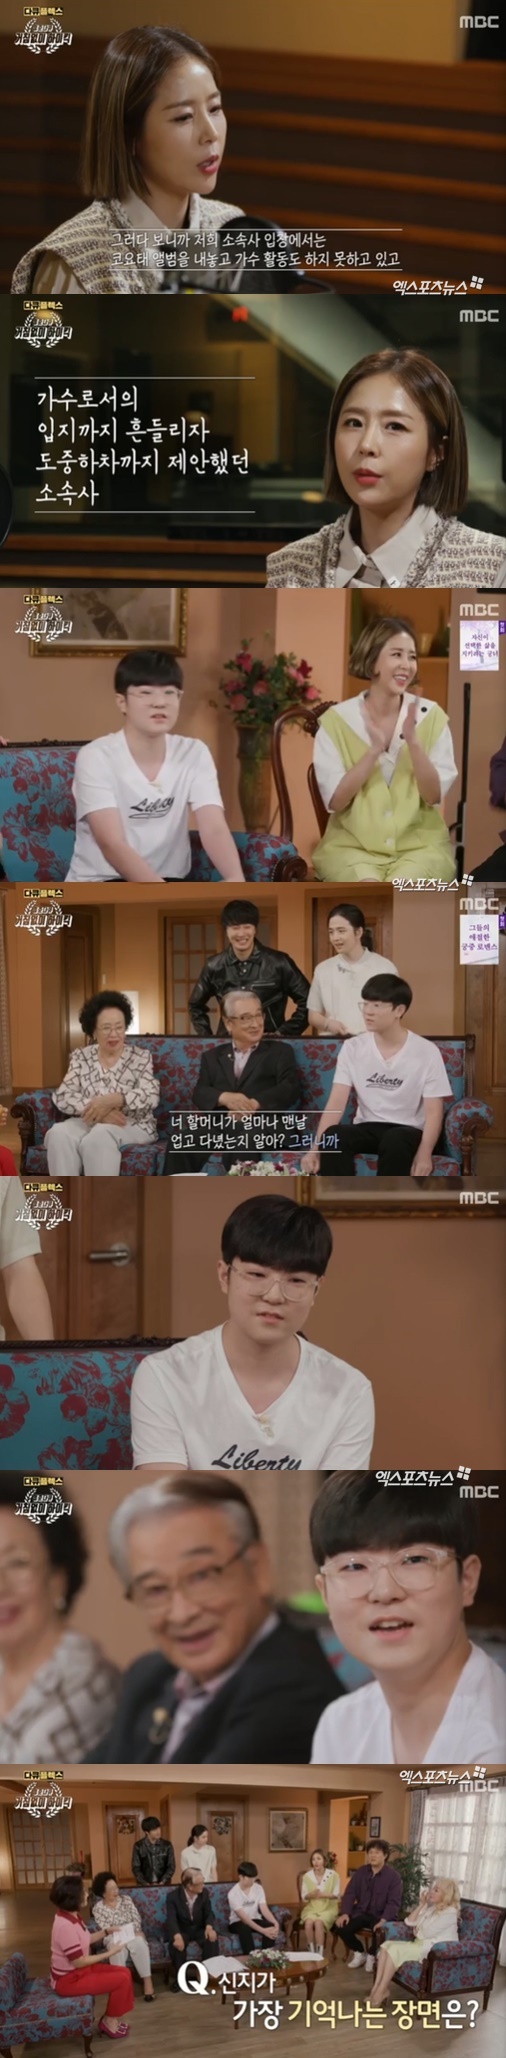 In the second part of MBC Document Flex - Youth Documentary - High Kick broadcast on the 12th, Jung Il-woo said, Minjung knows that his sisters love line is only his brother.I did, but I was divided. The story line changed at all. Shin Ji, who played a complicated role with her ex-husband, but her relatively small amount, said, I thought (acting) too easily. That would have been the beginning of an error that misinterpreted the character at the beginning.I hate to look so bad. I keep getting angry because I have nothing good.I have to postpone Shin Jis position in the play, but I just acted as written in the script. Shin Ji said, The company released a Koyote album and asked me to quit because I was a fan who was not even doing Singer activities.Honestly it was so hard and every time, Moy Yat cried, Confessions said.High Kick family members shot commercials in succession, but the hate-sham character Shin Ji was alienated; Lee Soon-jae said, In my own feelings, I will.Im a singer...I cant get in one family and feel alienated by myself, but we dont think so at all. It was fun.Shin Ji gradually began to gain sympathy from viewers and became an important variable once again in the relationship between civil affairs and civil affairs at the end of the play.Shin Ji appeared in the studio with his son Juni (Ko Chae-min) in the play, and Juni, a cute baby and the only grandson of Sun-Jane, was surprised to be a big student.Im Ko Chae-min, who plays Jun. Im 16 now, introduced Ko Chae-min, who said, Na Moon-hee and Lee Soon-jae, Jung Il-woo and Jung Jun-ha did it.I do not know how much your grandmother always carries, , Eyelashes are the same, and skin is the same. My friends know, I tease them, I do not teach teachers, I asked them to see High Kick.I do not remember well, but I am happy to remain in the video. Photo: MBC Broadcasting Screen